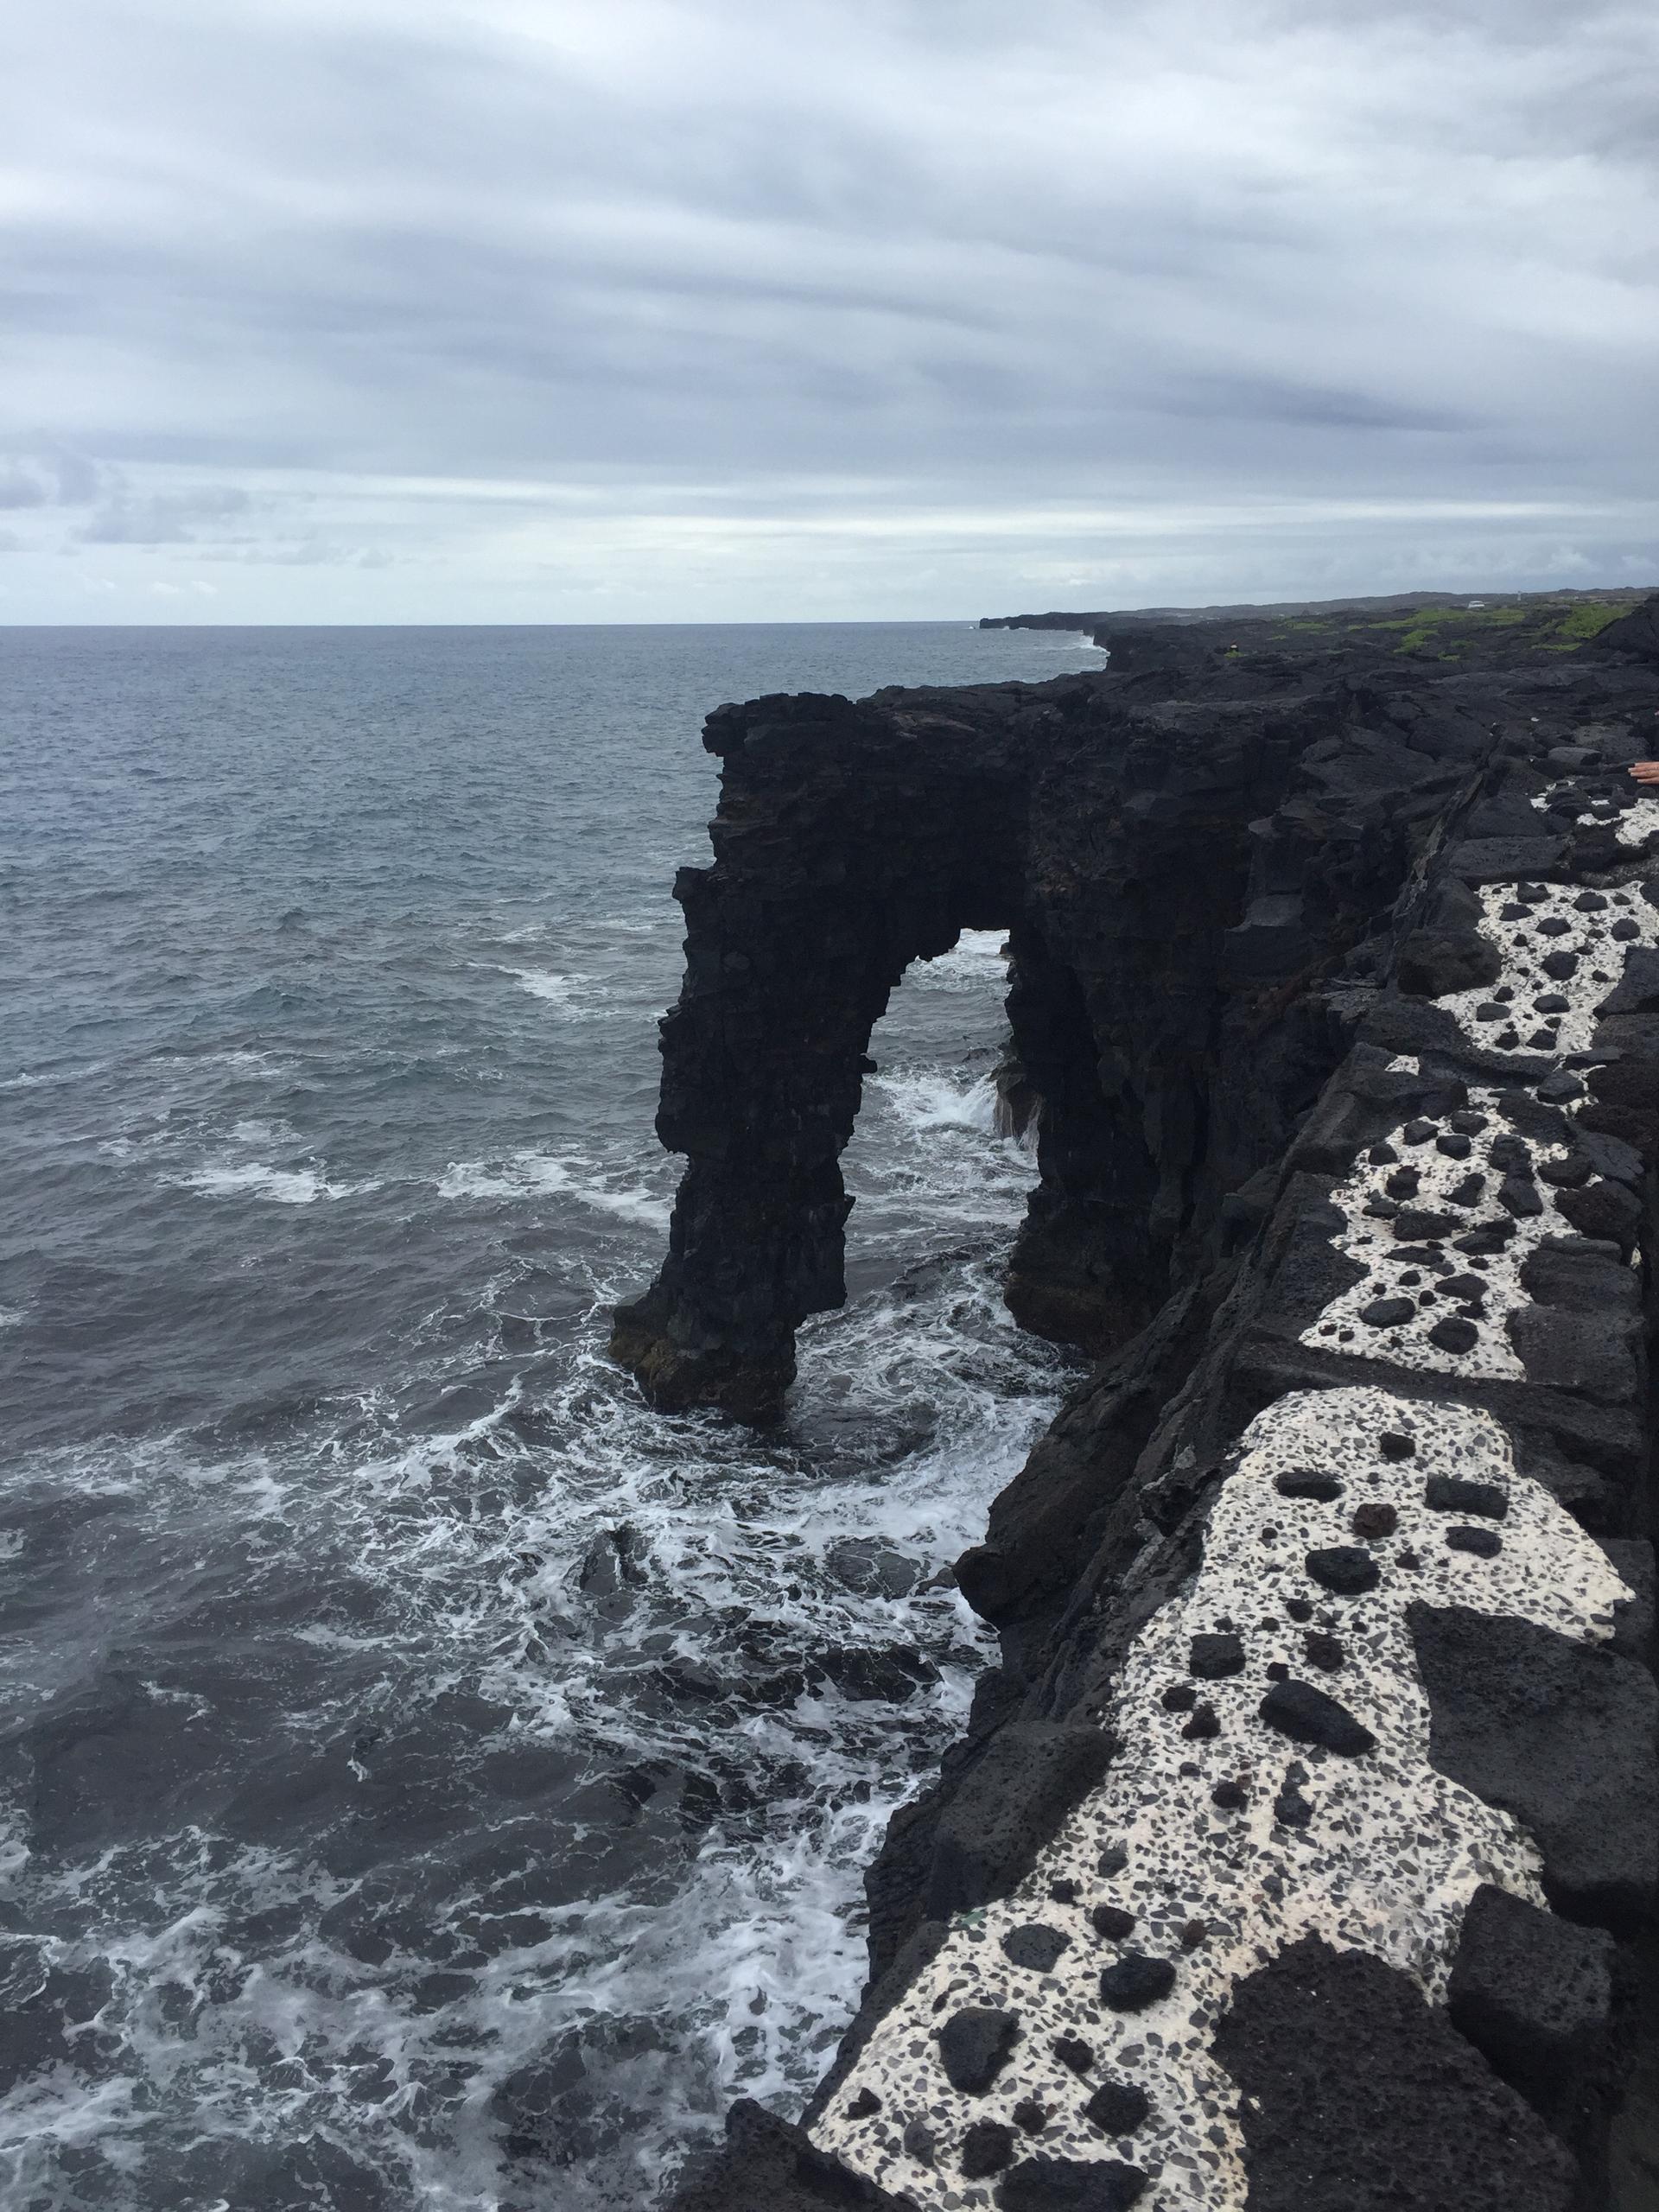 The Holei Sea Arch at Hawaii Volcanoes National Park is quite a sight.